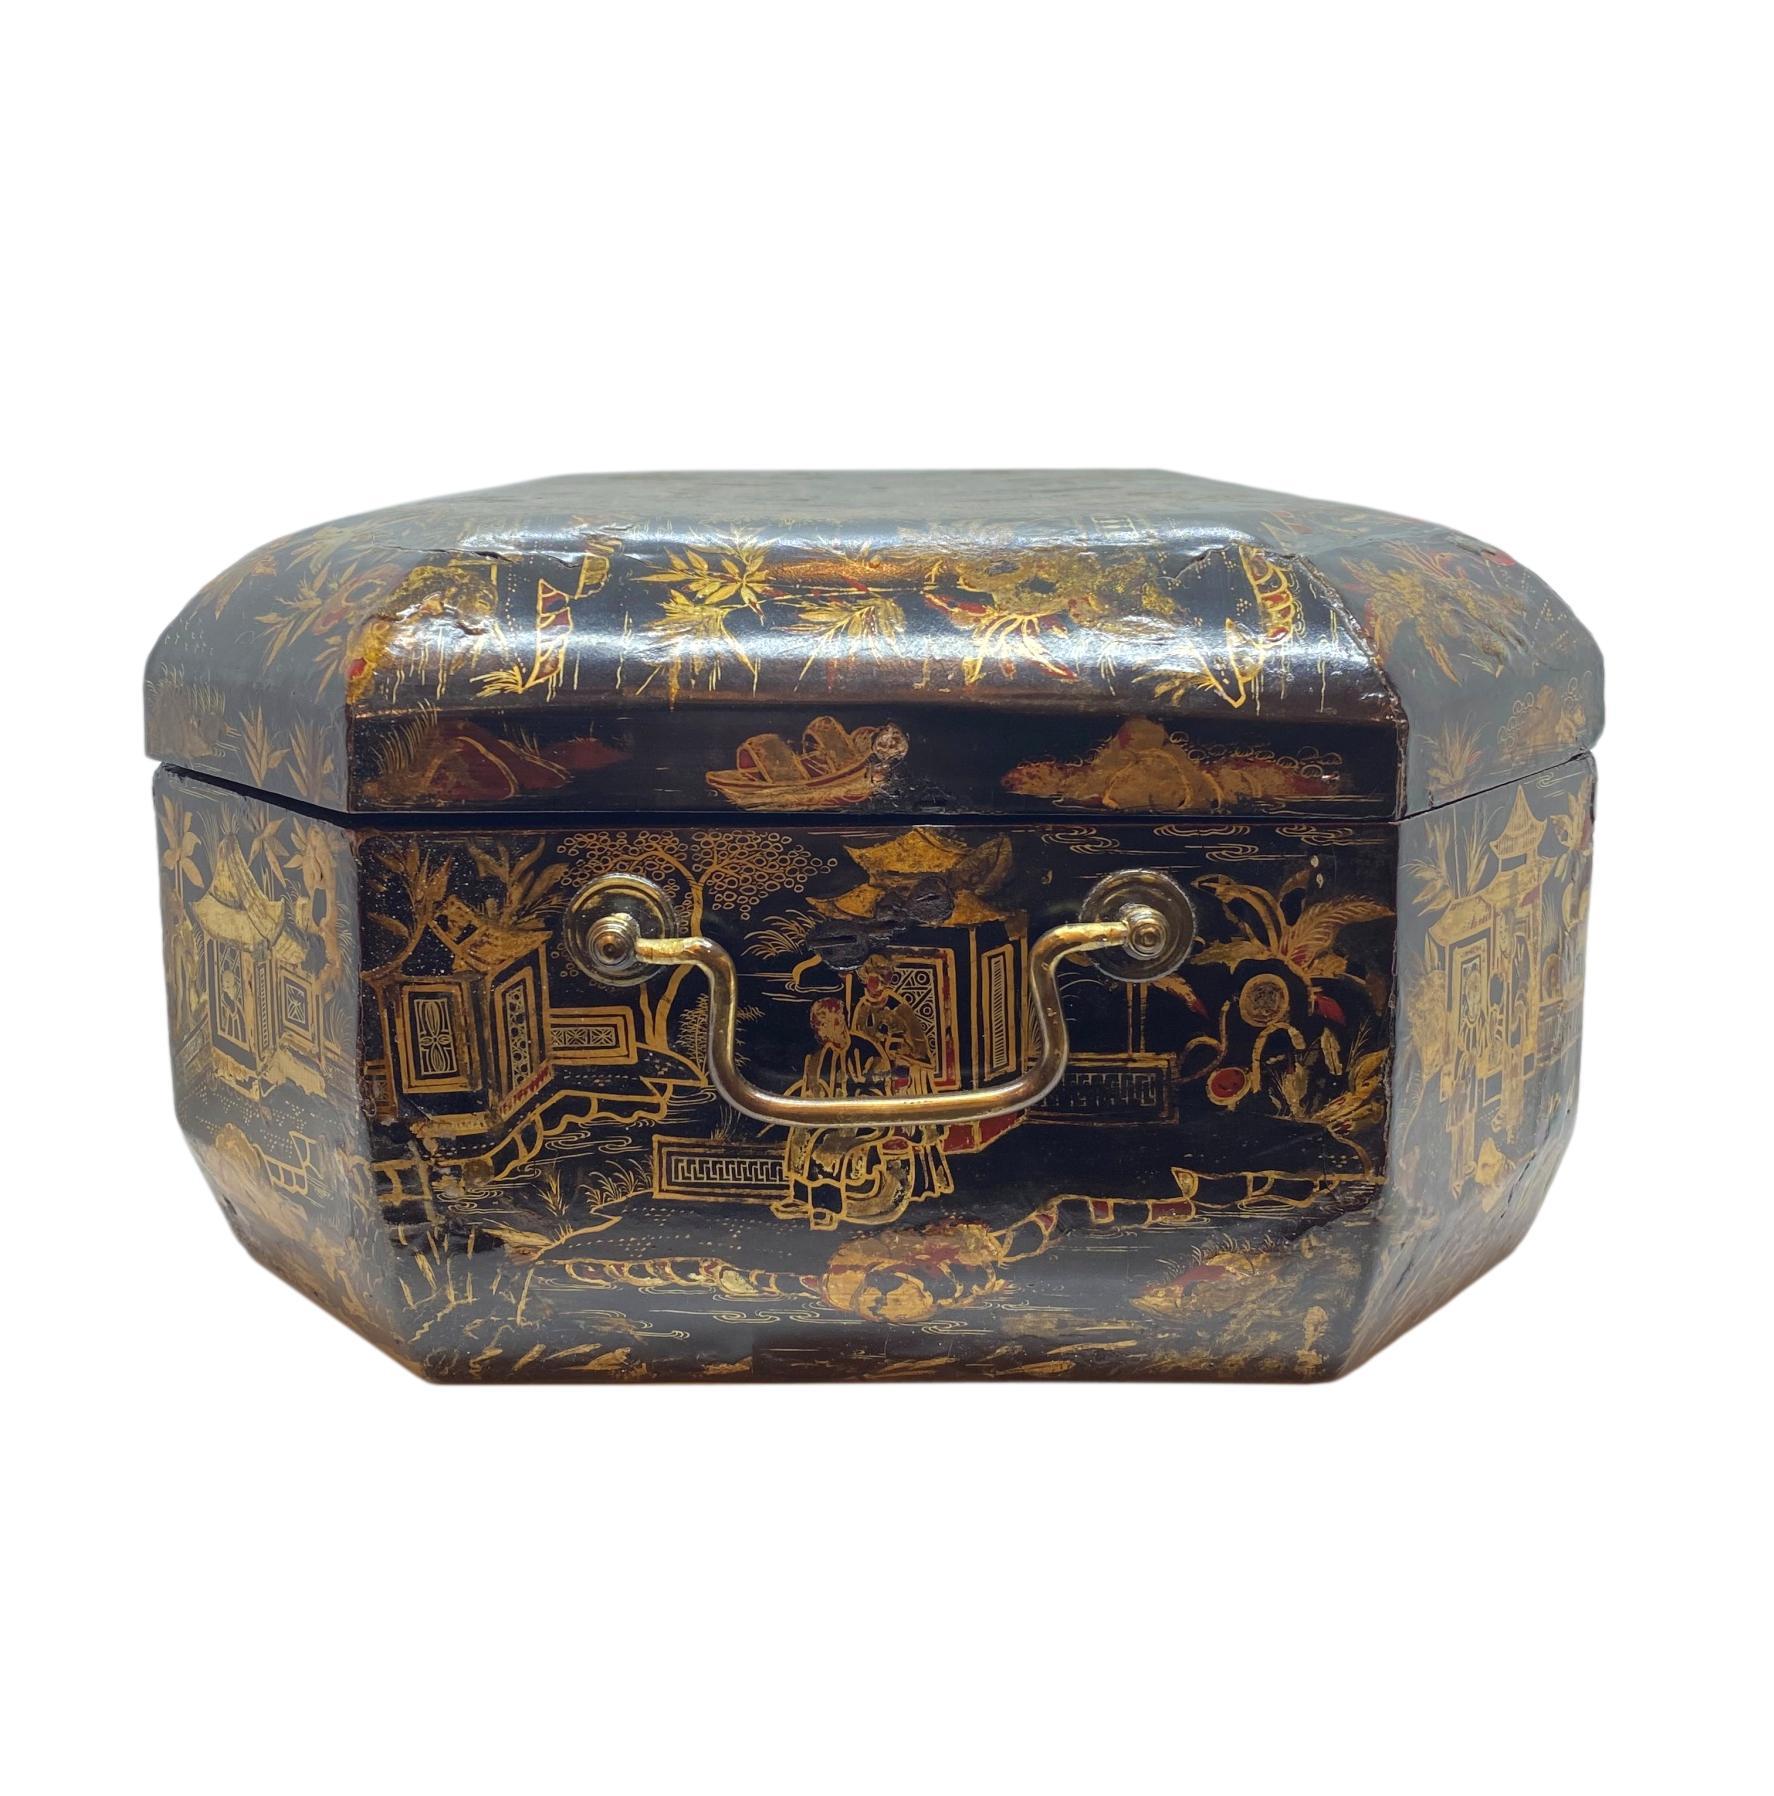 Hand-Crafted 18th Century Chinoiserie Work Box with Fitted Interior, Black, Gold, Red-Lacquer